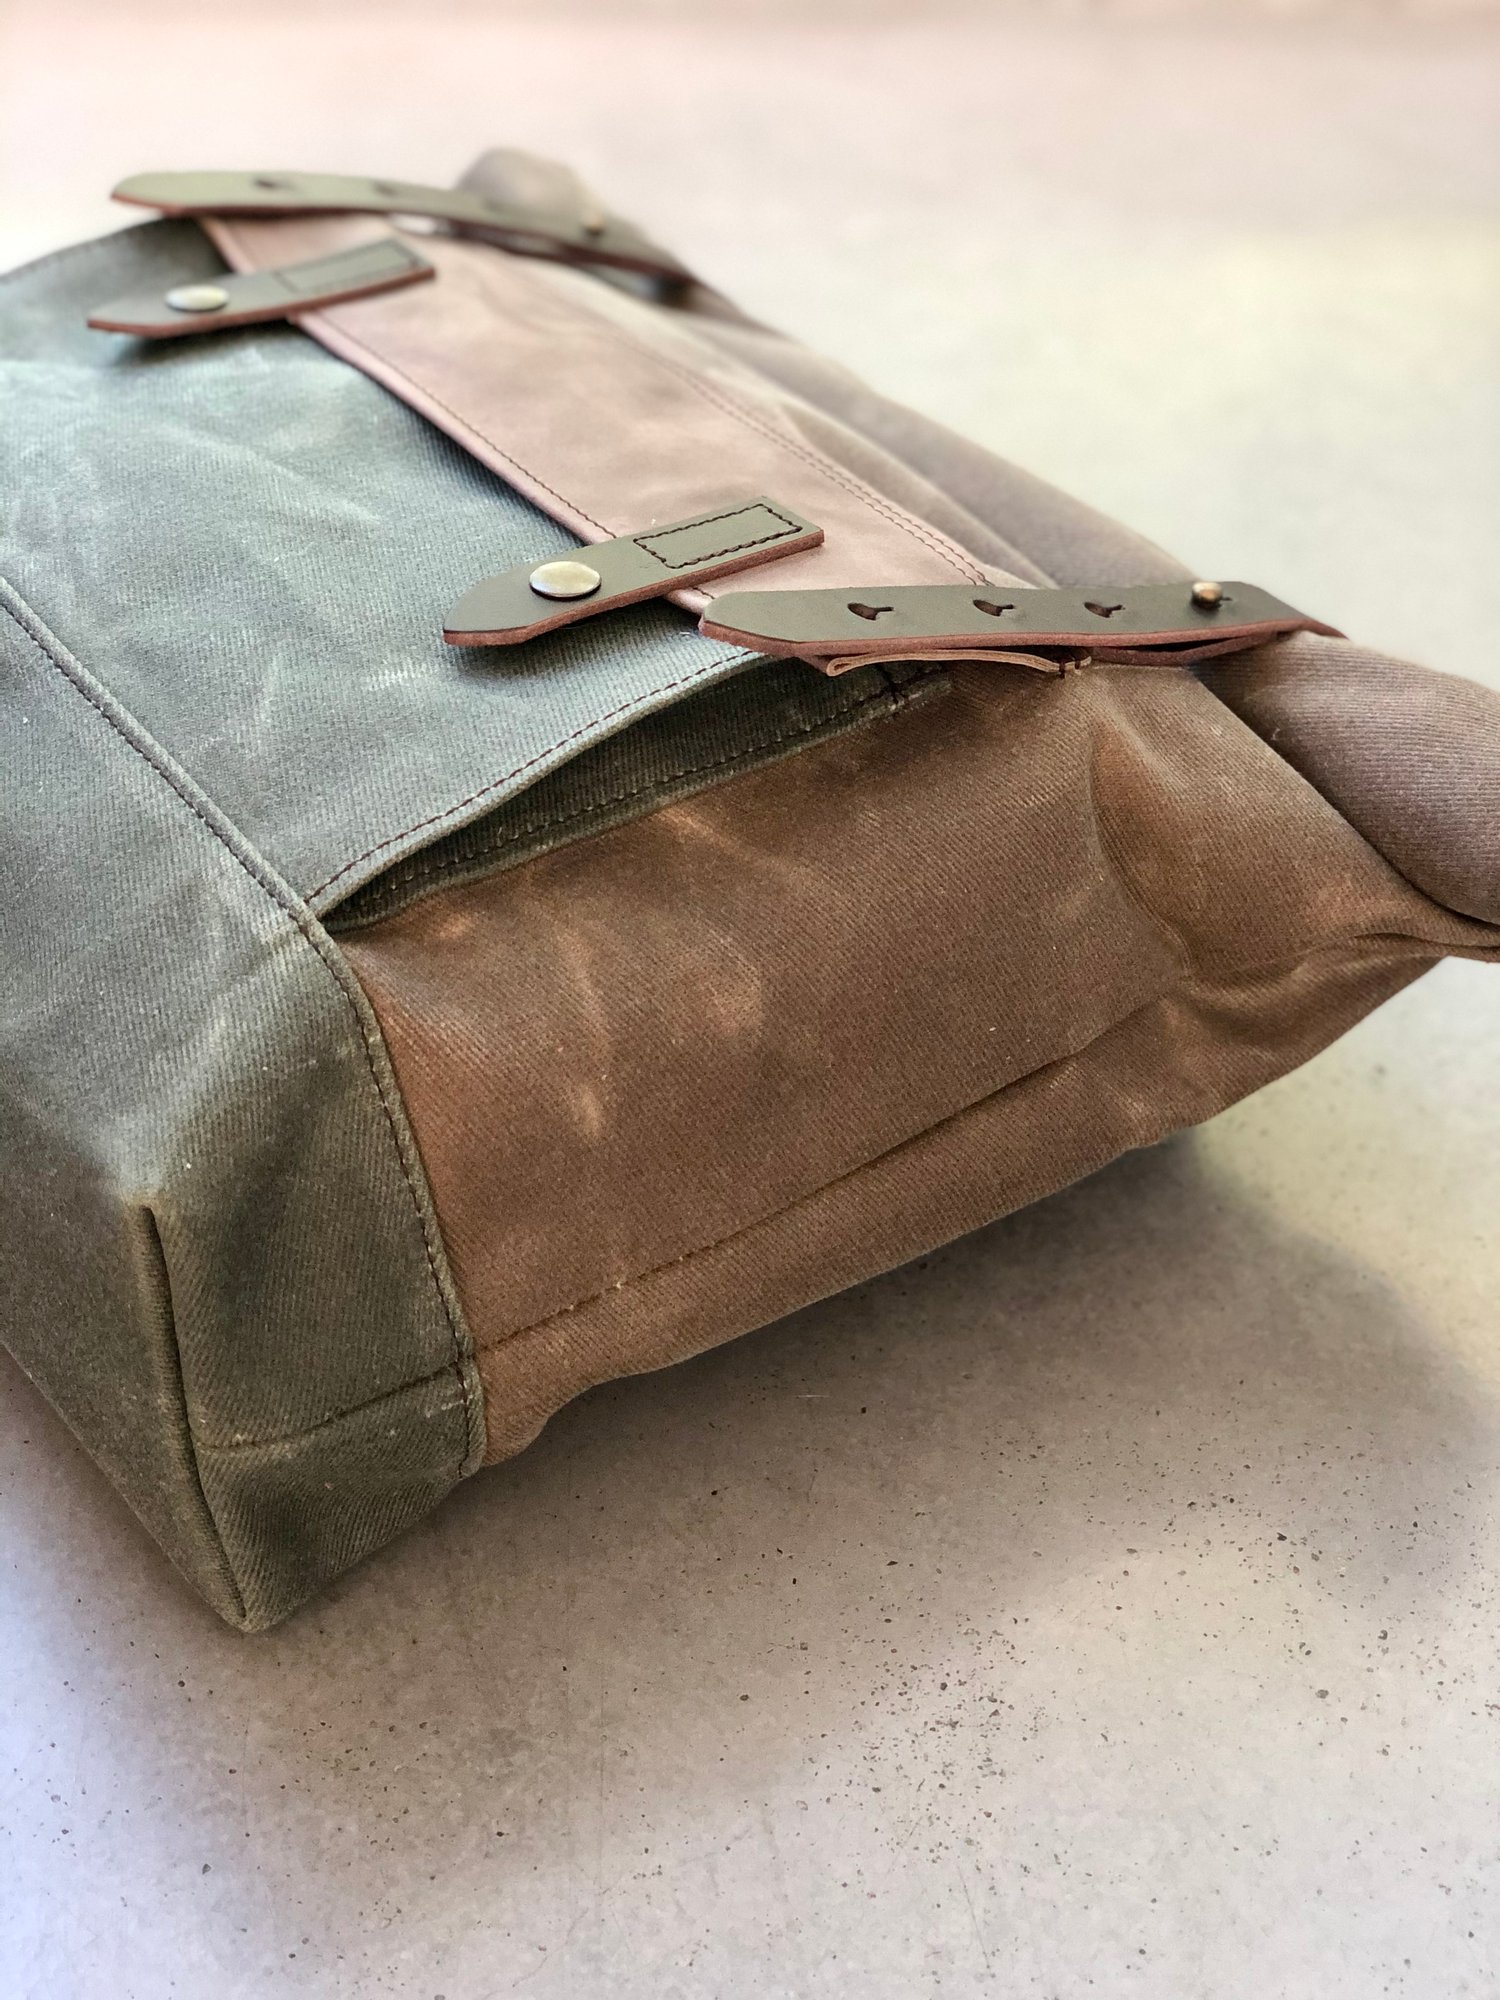 Image of Motorcycle bag in waxed canvas Motorbike bag Saddle bag Bicycle bag in waxed canvas and leather Bike